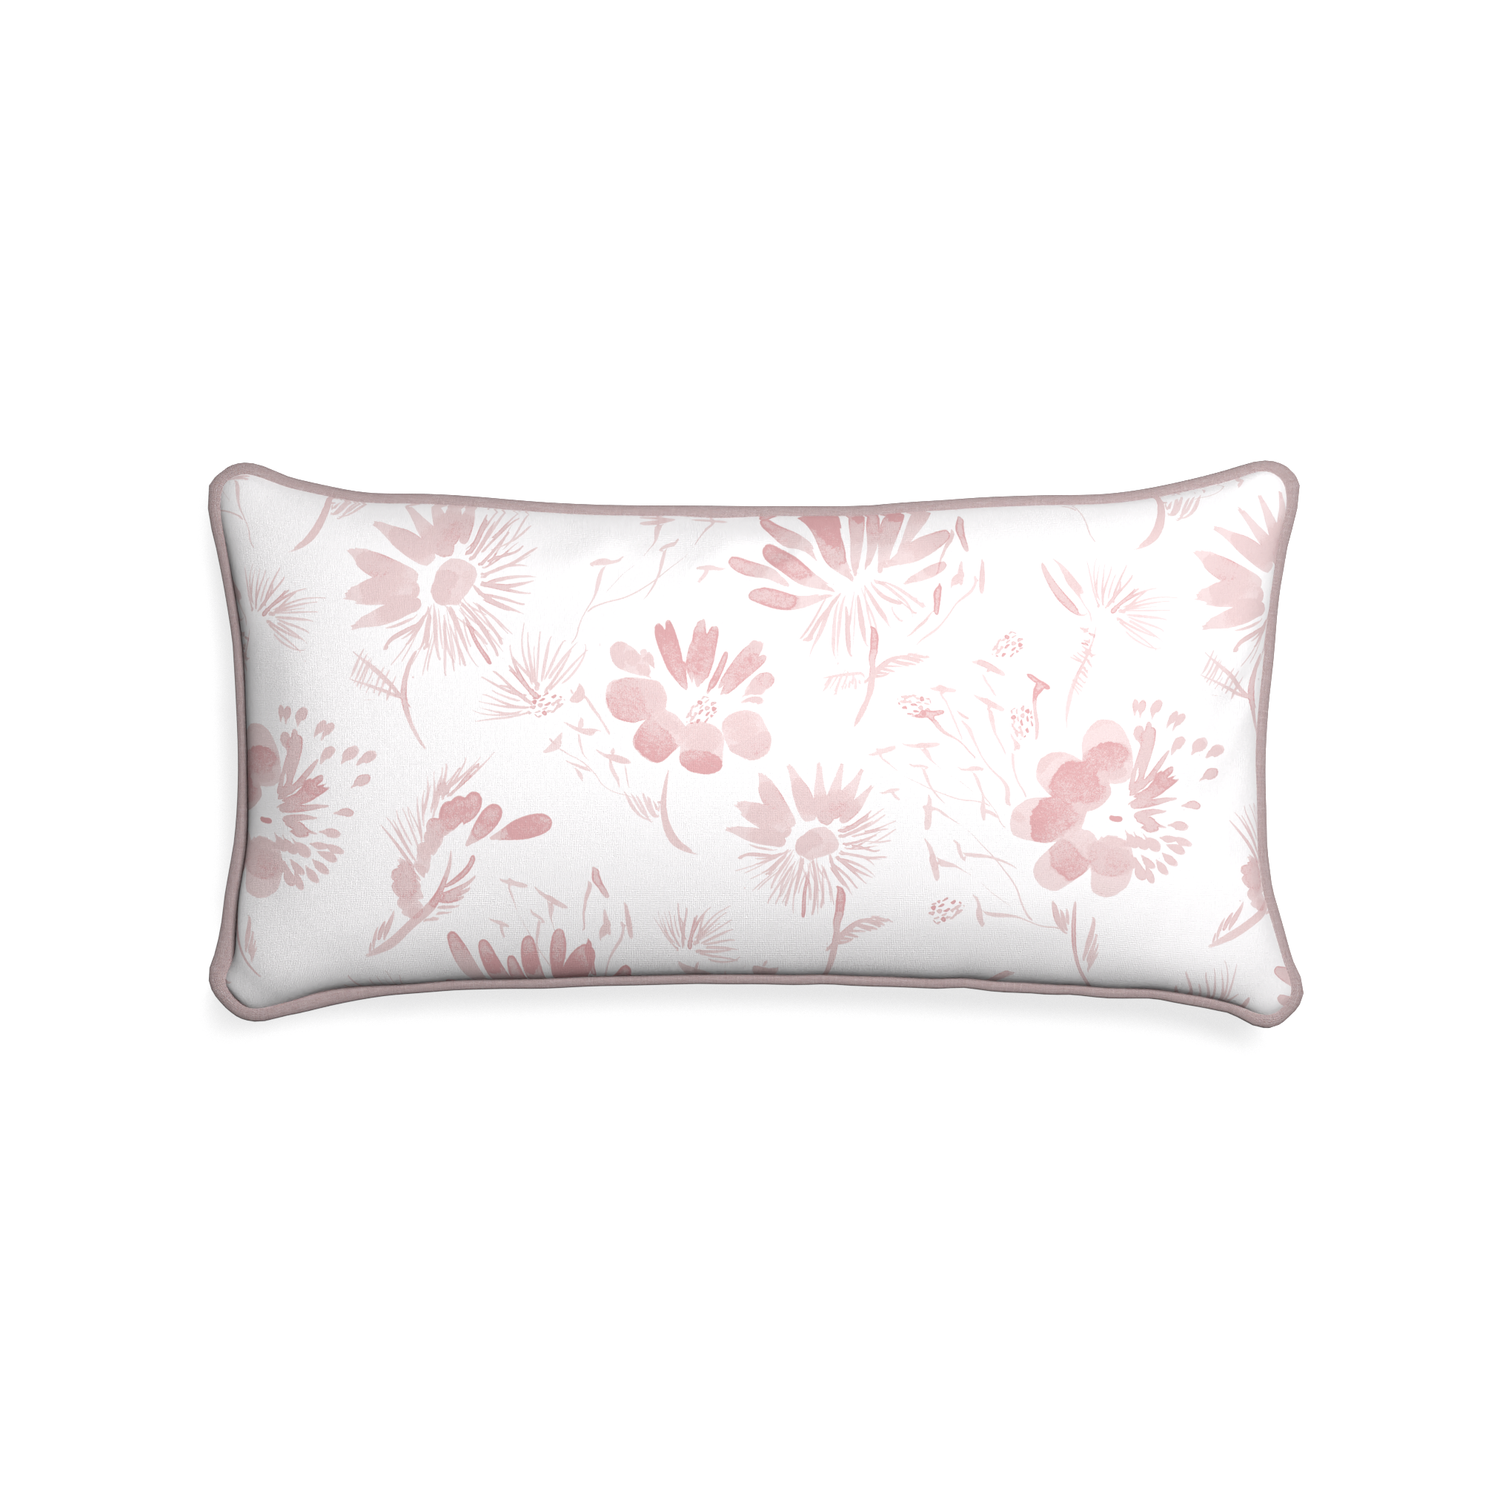 Midi-lumbar blake custom pink floralpillow with orchid piping on white background